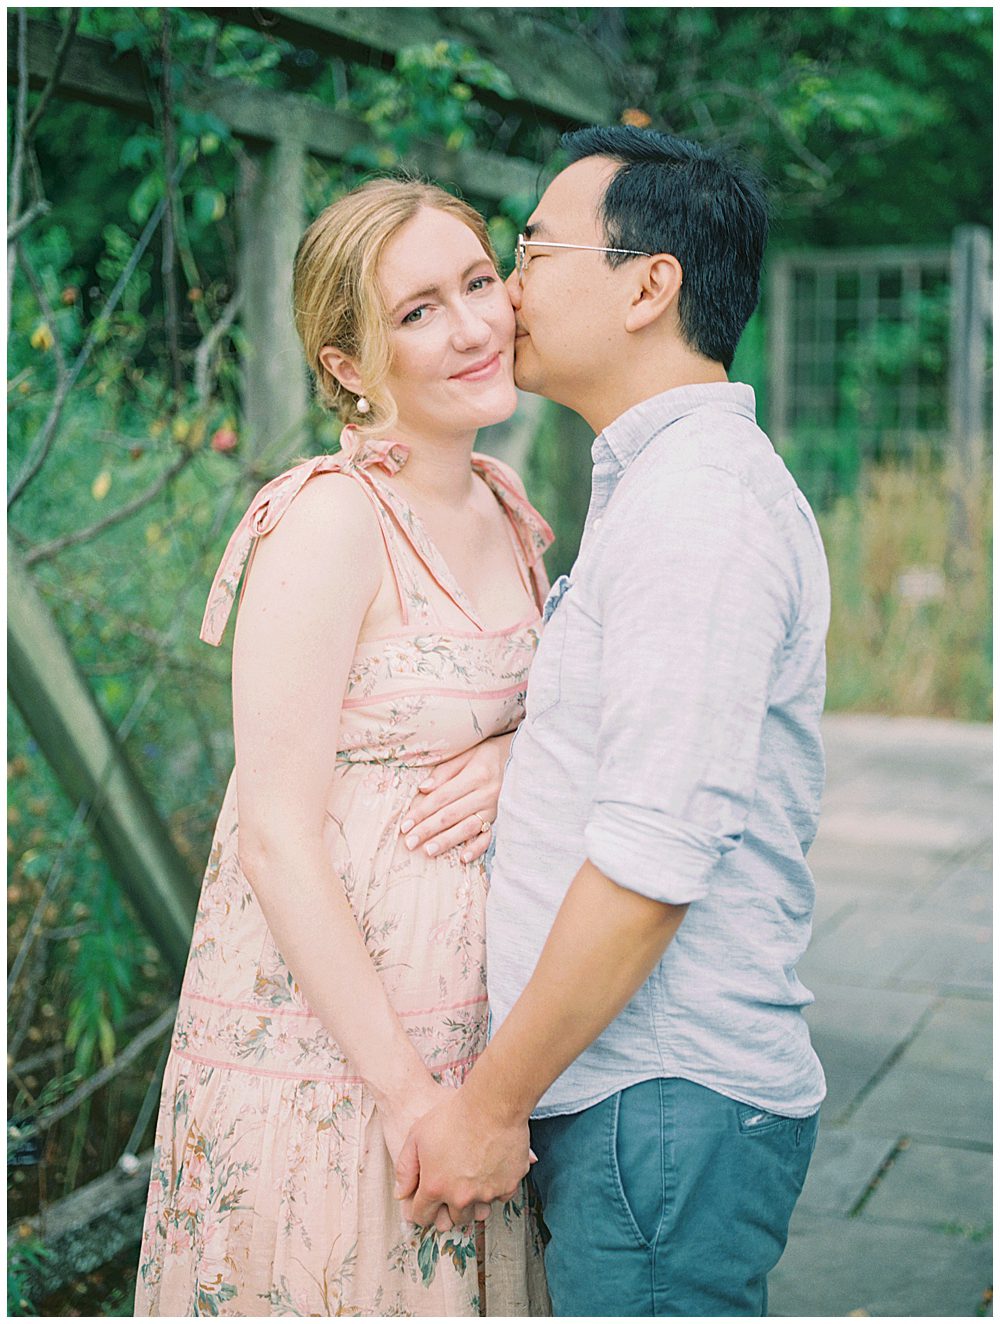 Husband kisses his wife's cheek as she smiles as they stand under a floral arch.